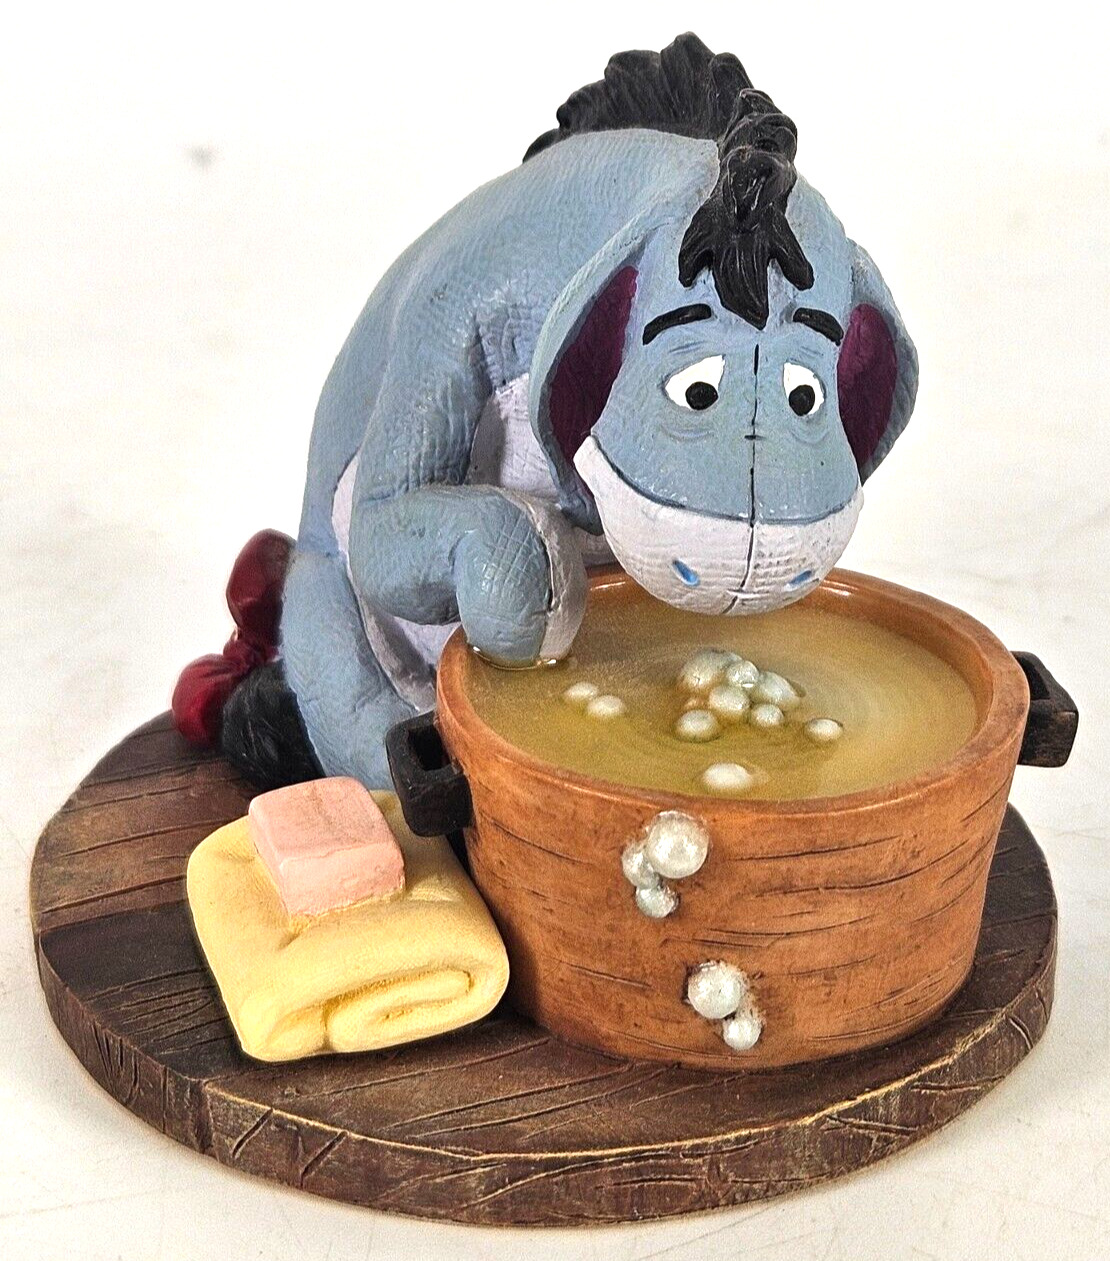 Simply Pooh Figurine Eeyore I Wish I Could Start The Day In a Bubbly Way Display